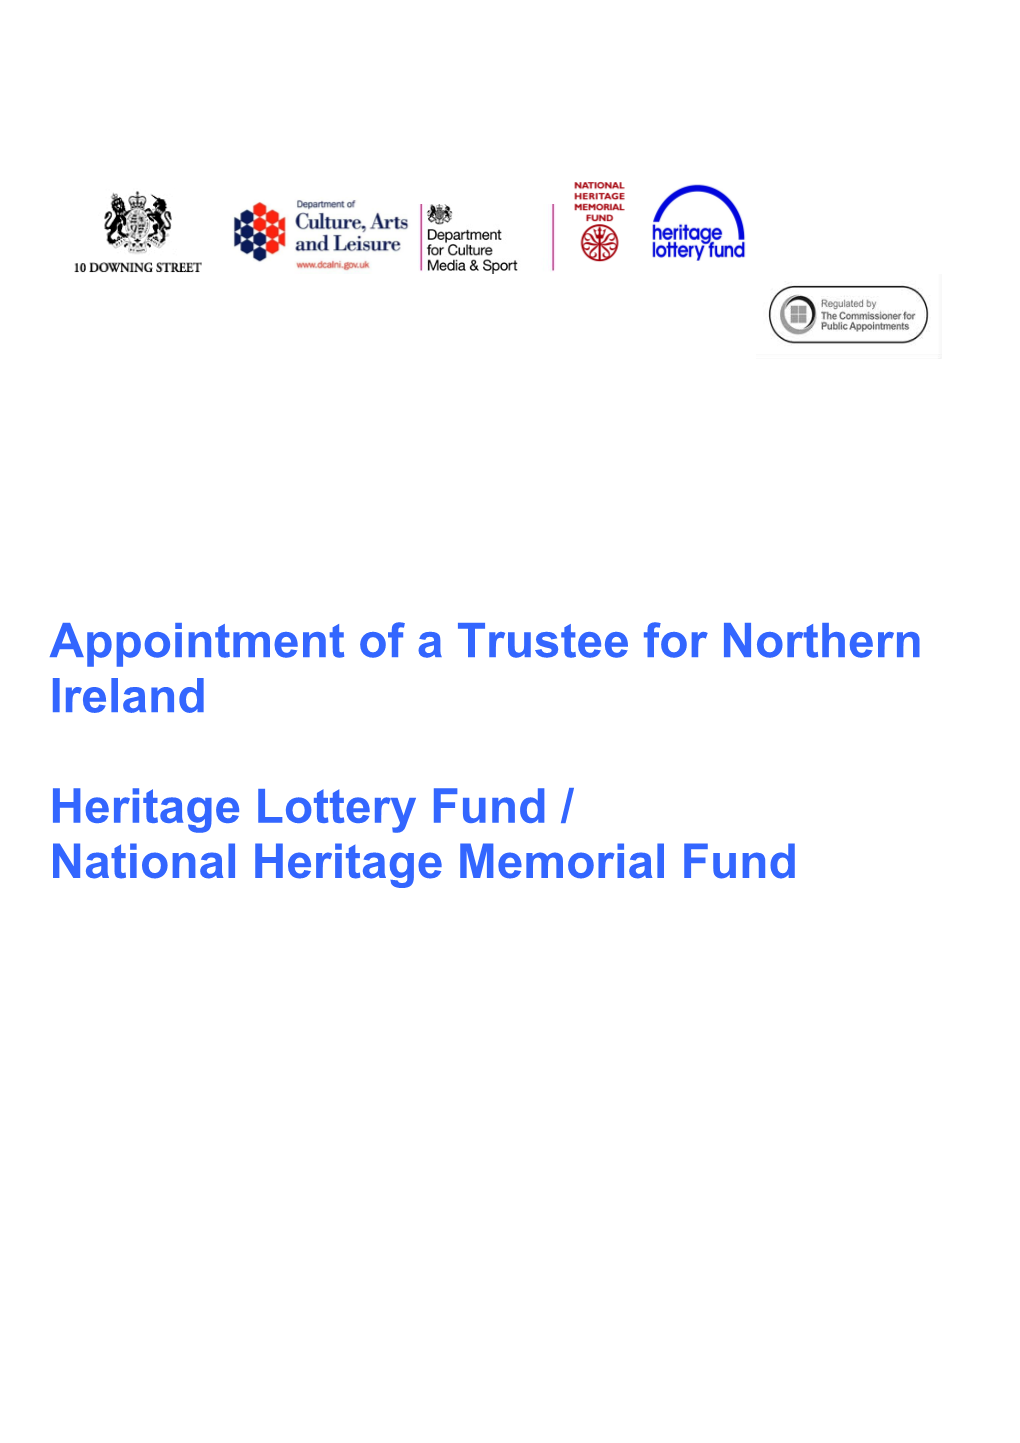 Appointment of a Trustee for Northern Ireland